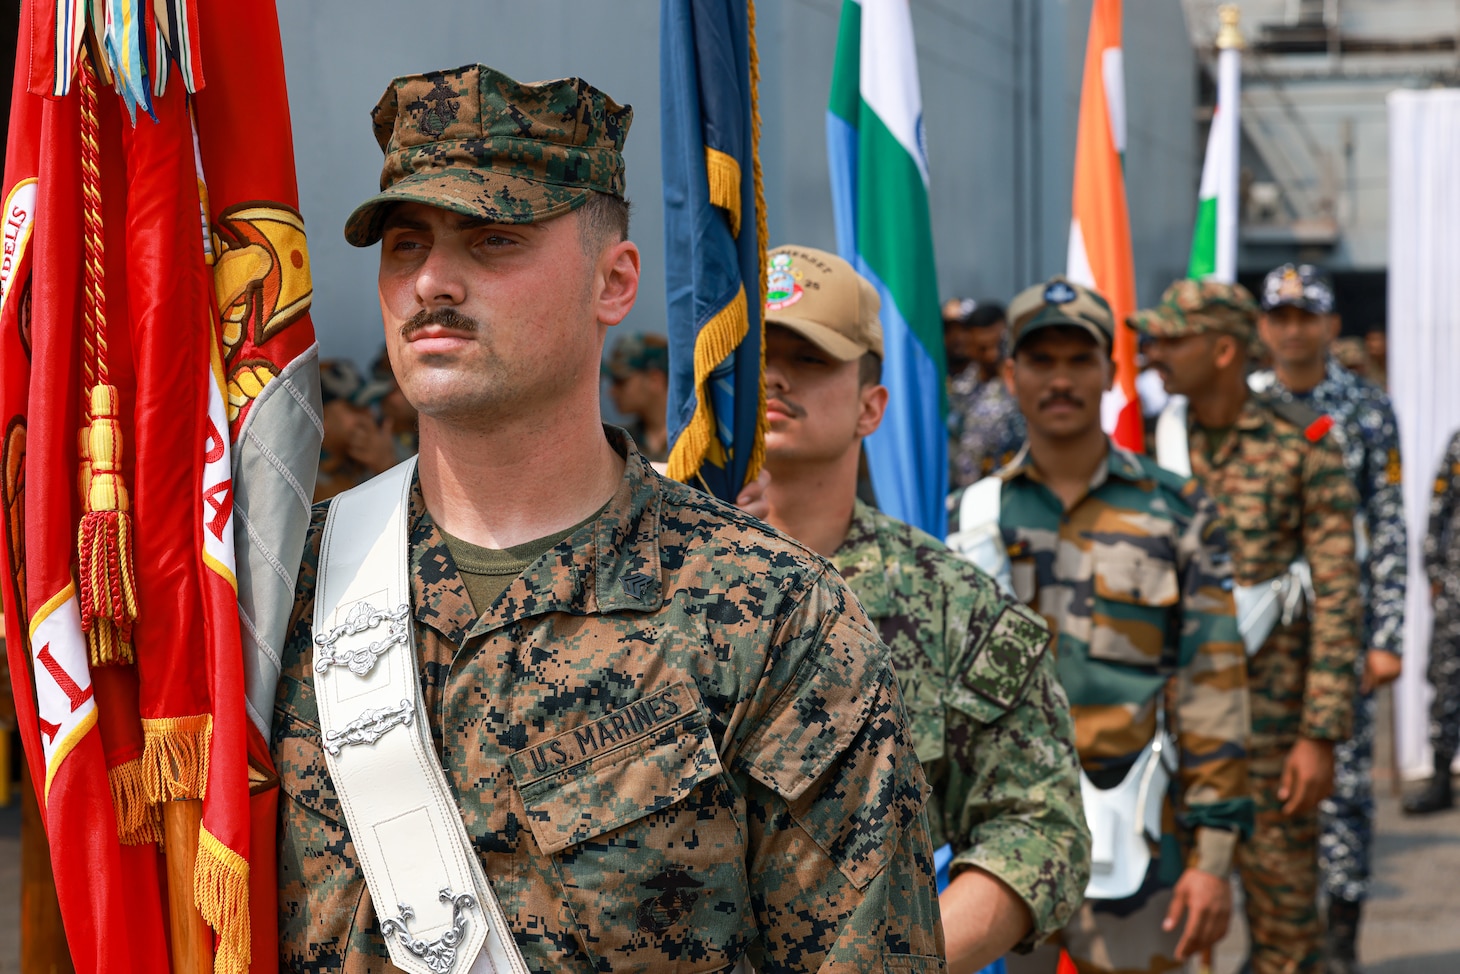 U.S. Marine Corps Sgt. Tristan Lake, a maintenance chief assigned to Combat Logistics Battalion 15, 15th Marine Expeditionary Unit, and a Michigan native, prepares to march with U.S. and Republic of India flag bearers for the opening ceremony of Exercise Tiger TRIUMPH in Visakhapatnam, India, March 19, 2024. Tiger TRIUMPH is a U.S.-India tri-service amphibious exercise focused on humanitarian assistance and disaster relief readiness and interoperability. Tiger TRIUMPH enables U.S. and Indian Armed Forces to improve interoperability and bilateral, joint, and service readiness in the Indian Ocean region and beyond to better achieve mutual regional security objectives. (U.S. Marine Corps photo by Cpl. Aidan Hekker)